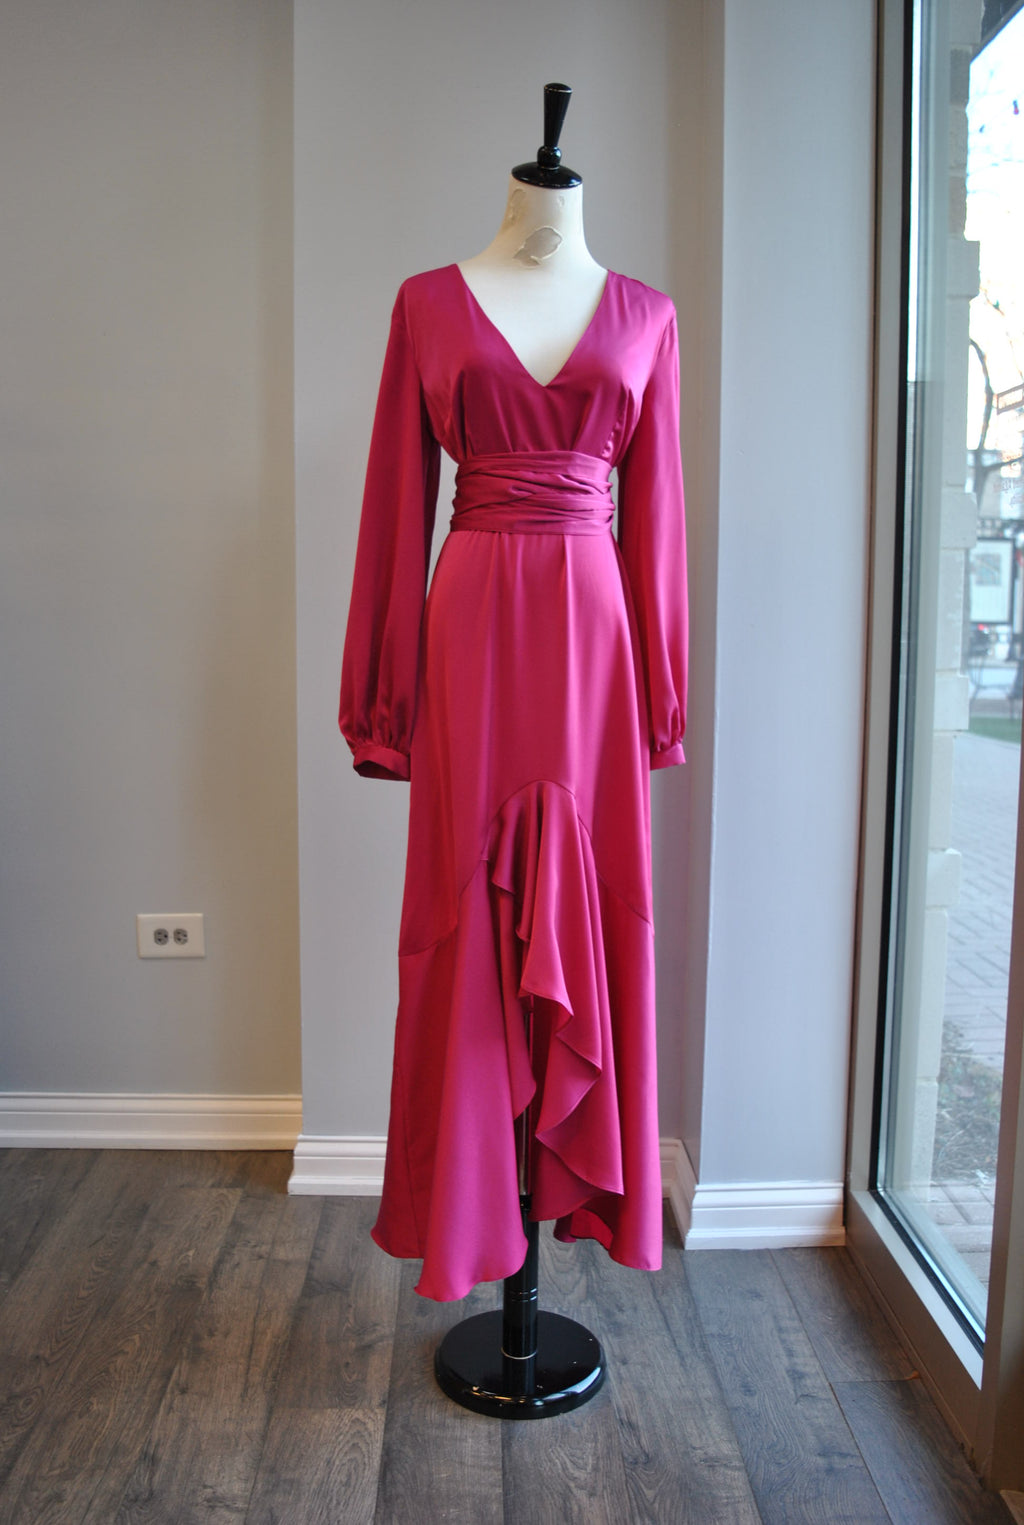 FUCHSIA PINK SILKY HIGH AND LOW DRESS